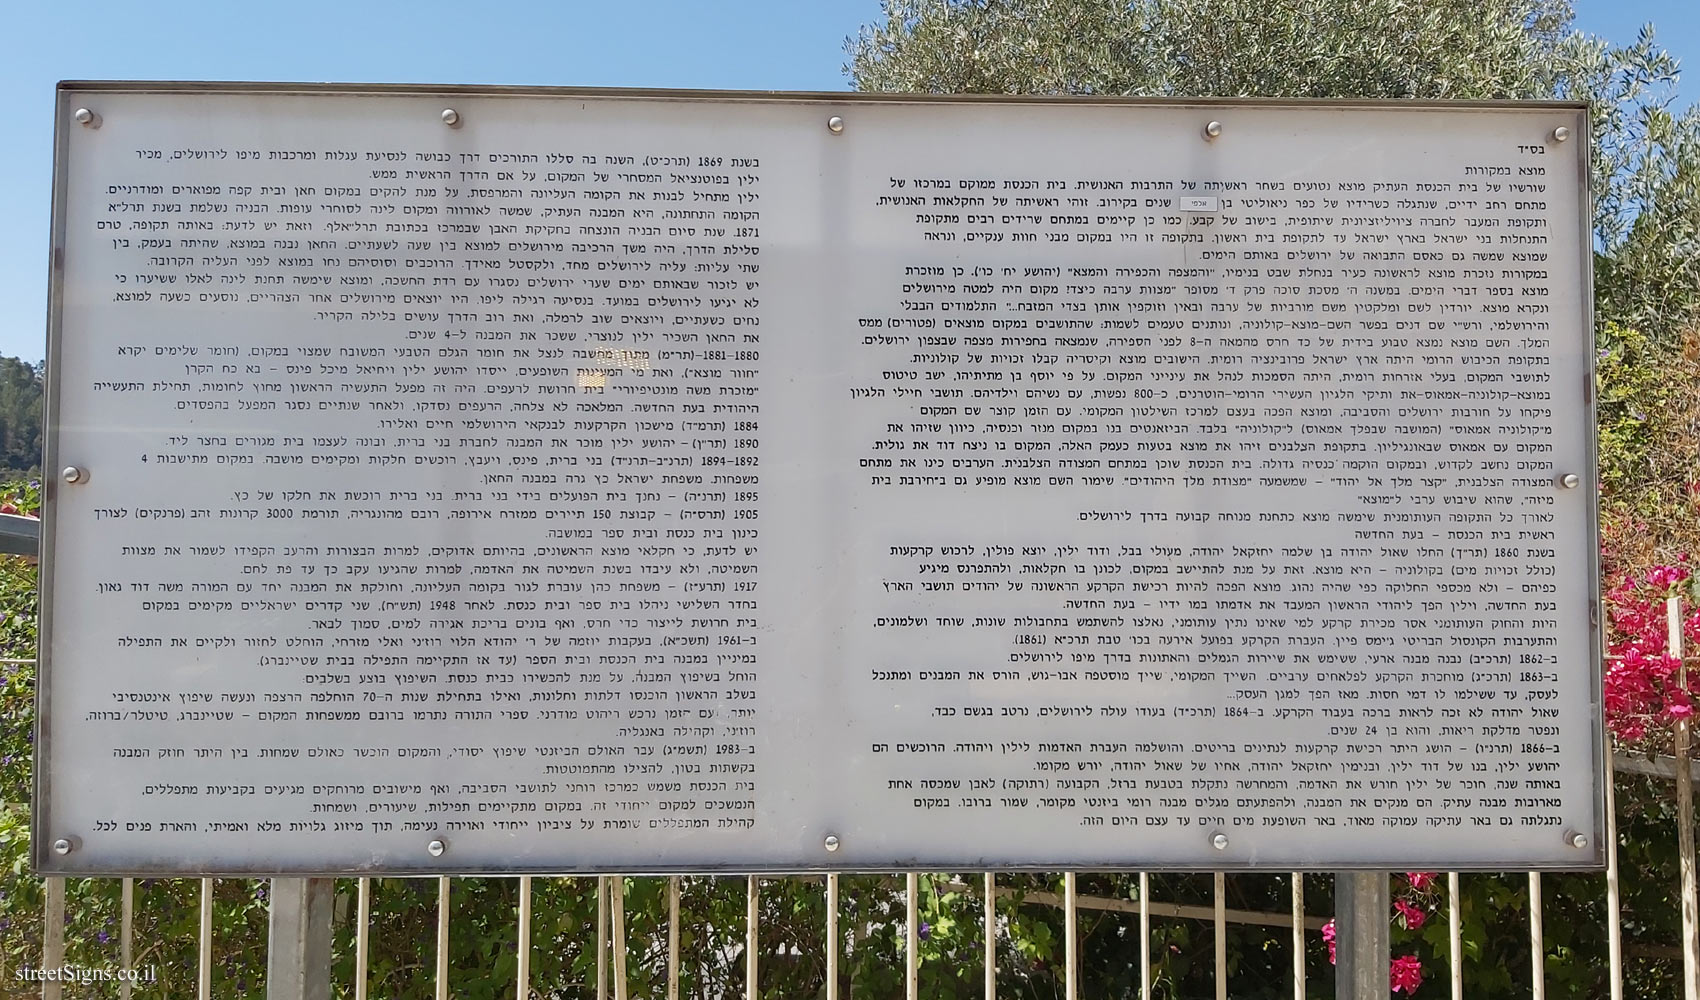 Motza - The synagogue and the history of the settlement